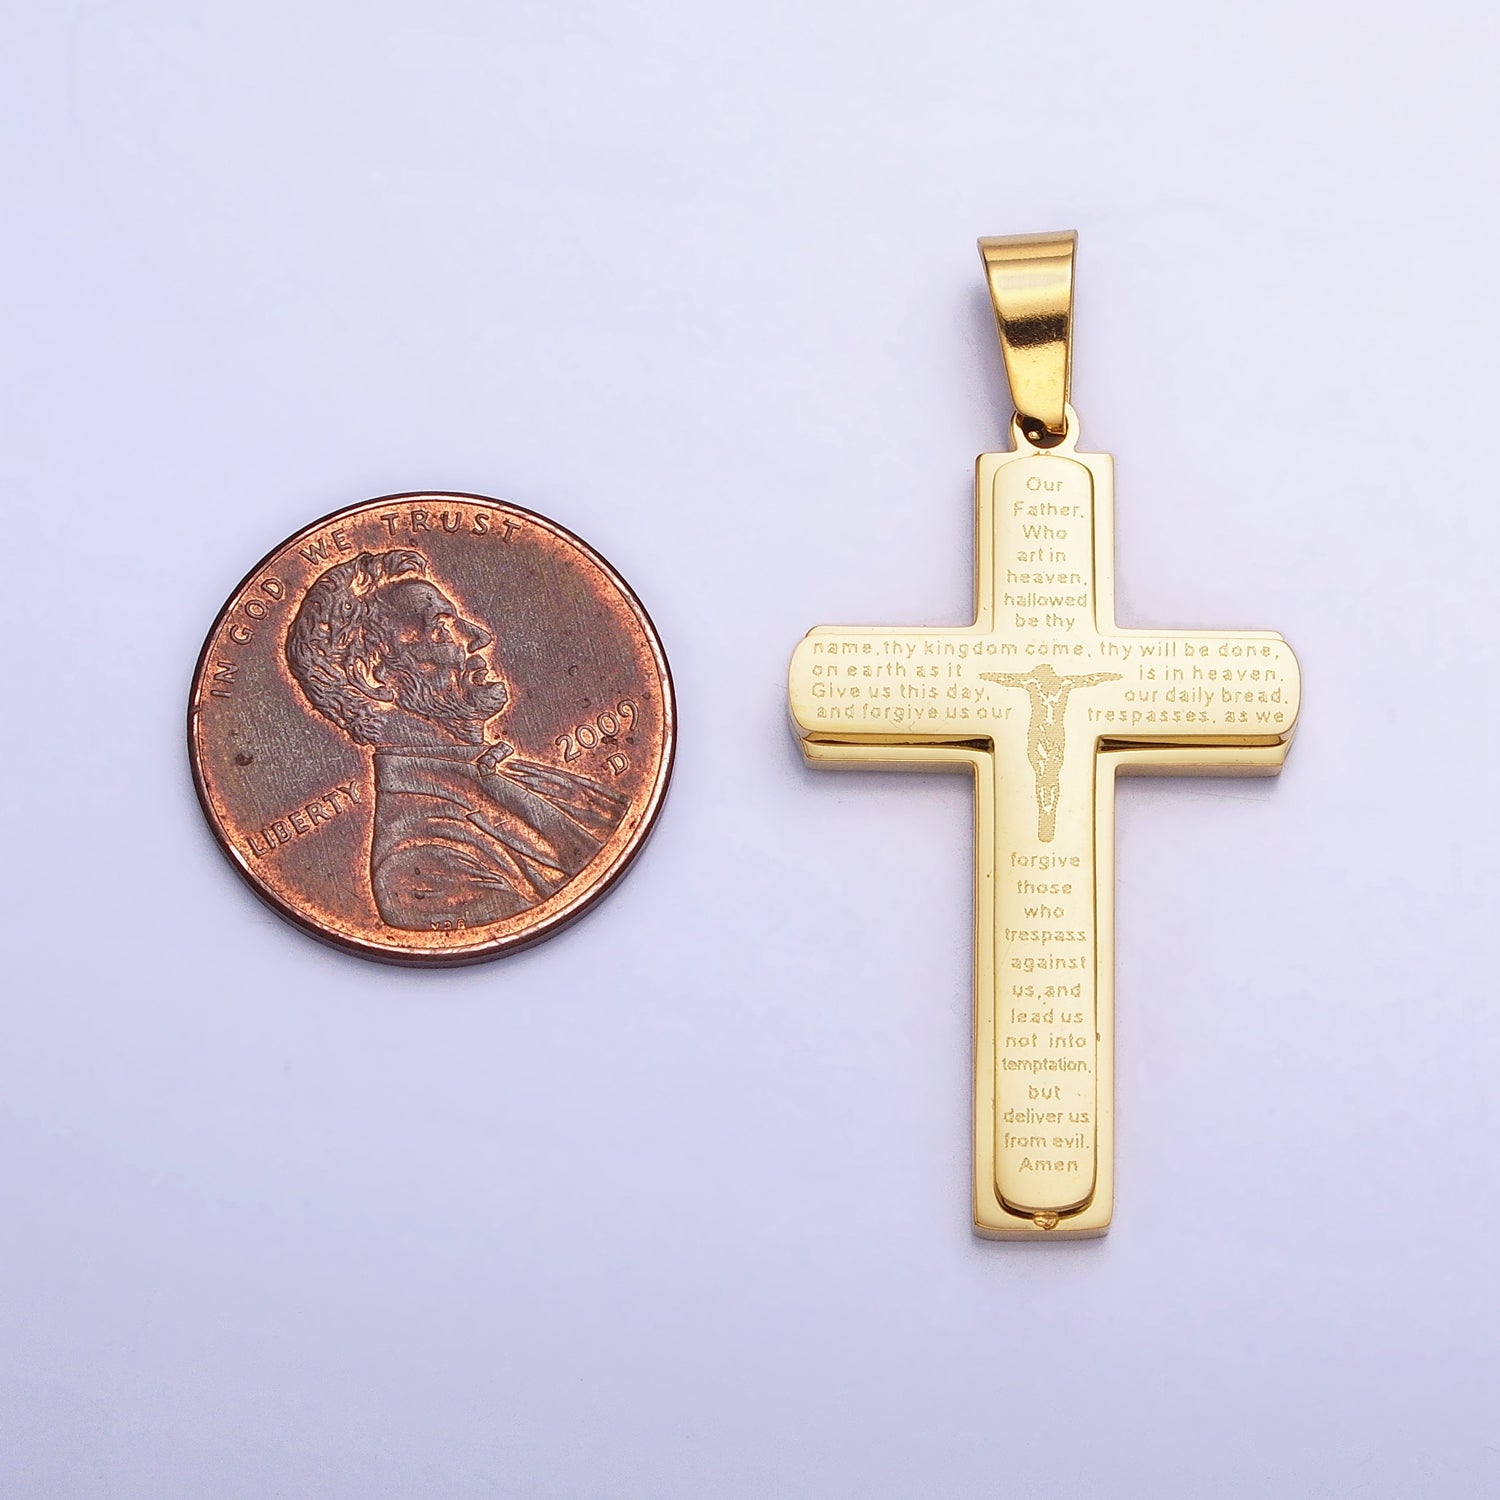 Lord Pray Pendant in Cross Charm 24K Gold Filled Engraved Our Father English Prayer Medallion for Religious Unisex Jewelry Making AB1368 AB1369 - DLUXCA